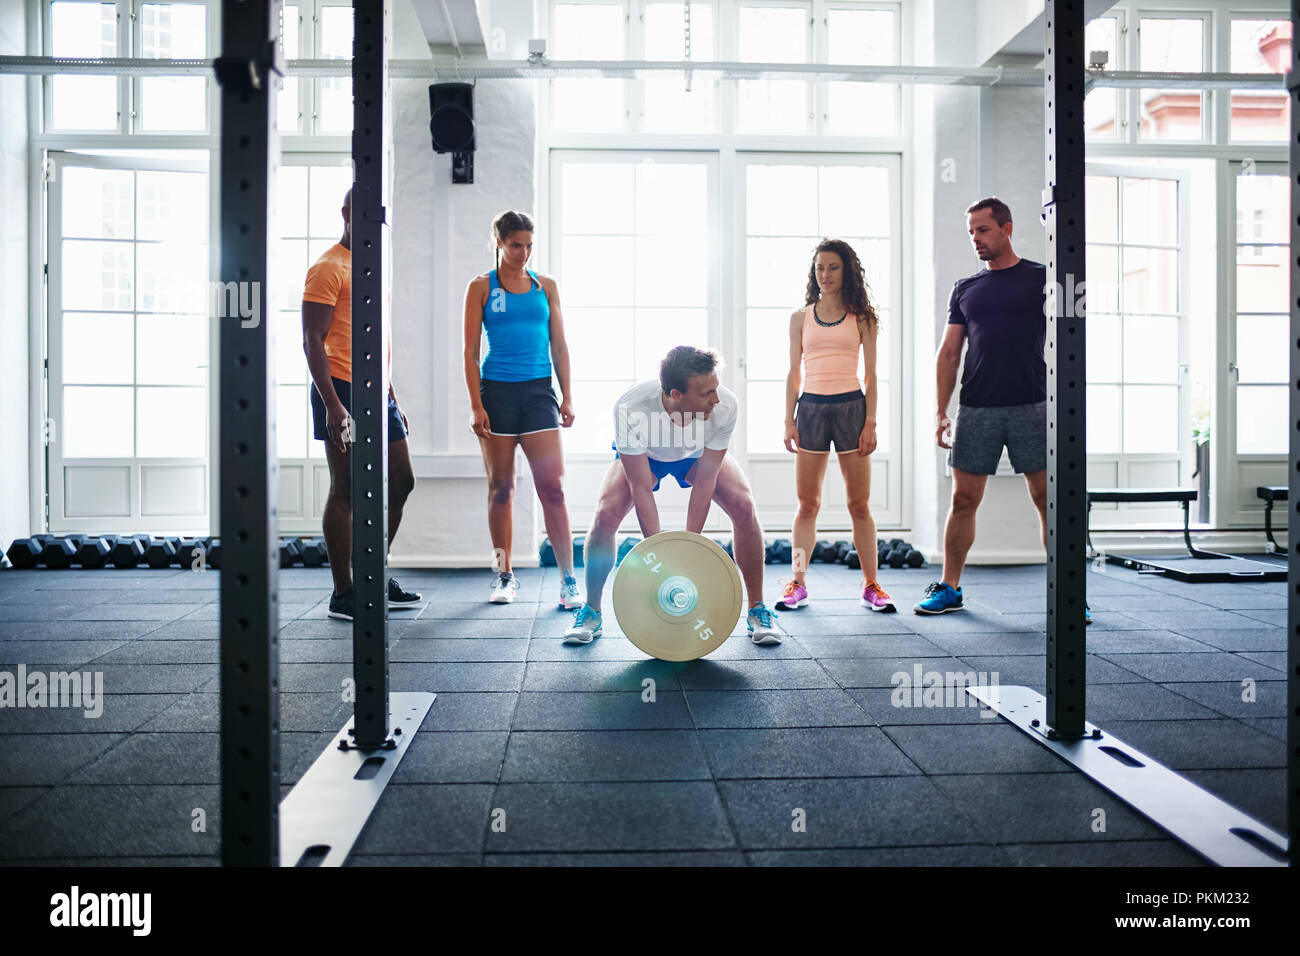 Fit young man preparing to lift a barbell with a group of friends encouraging him while working out together in a health club Stock Photo